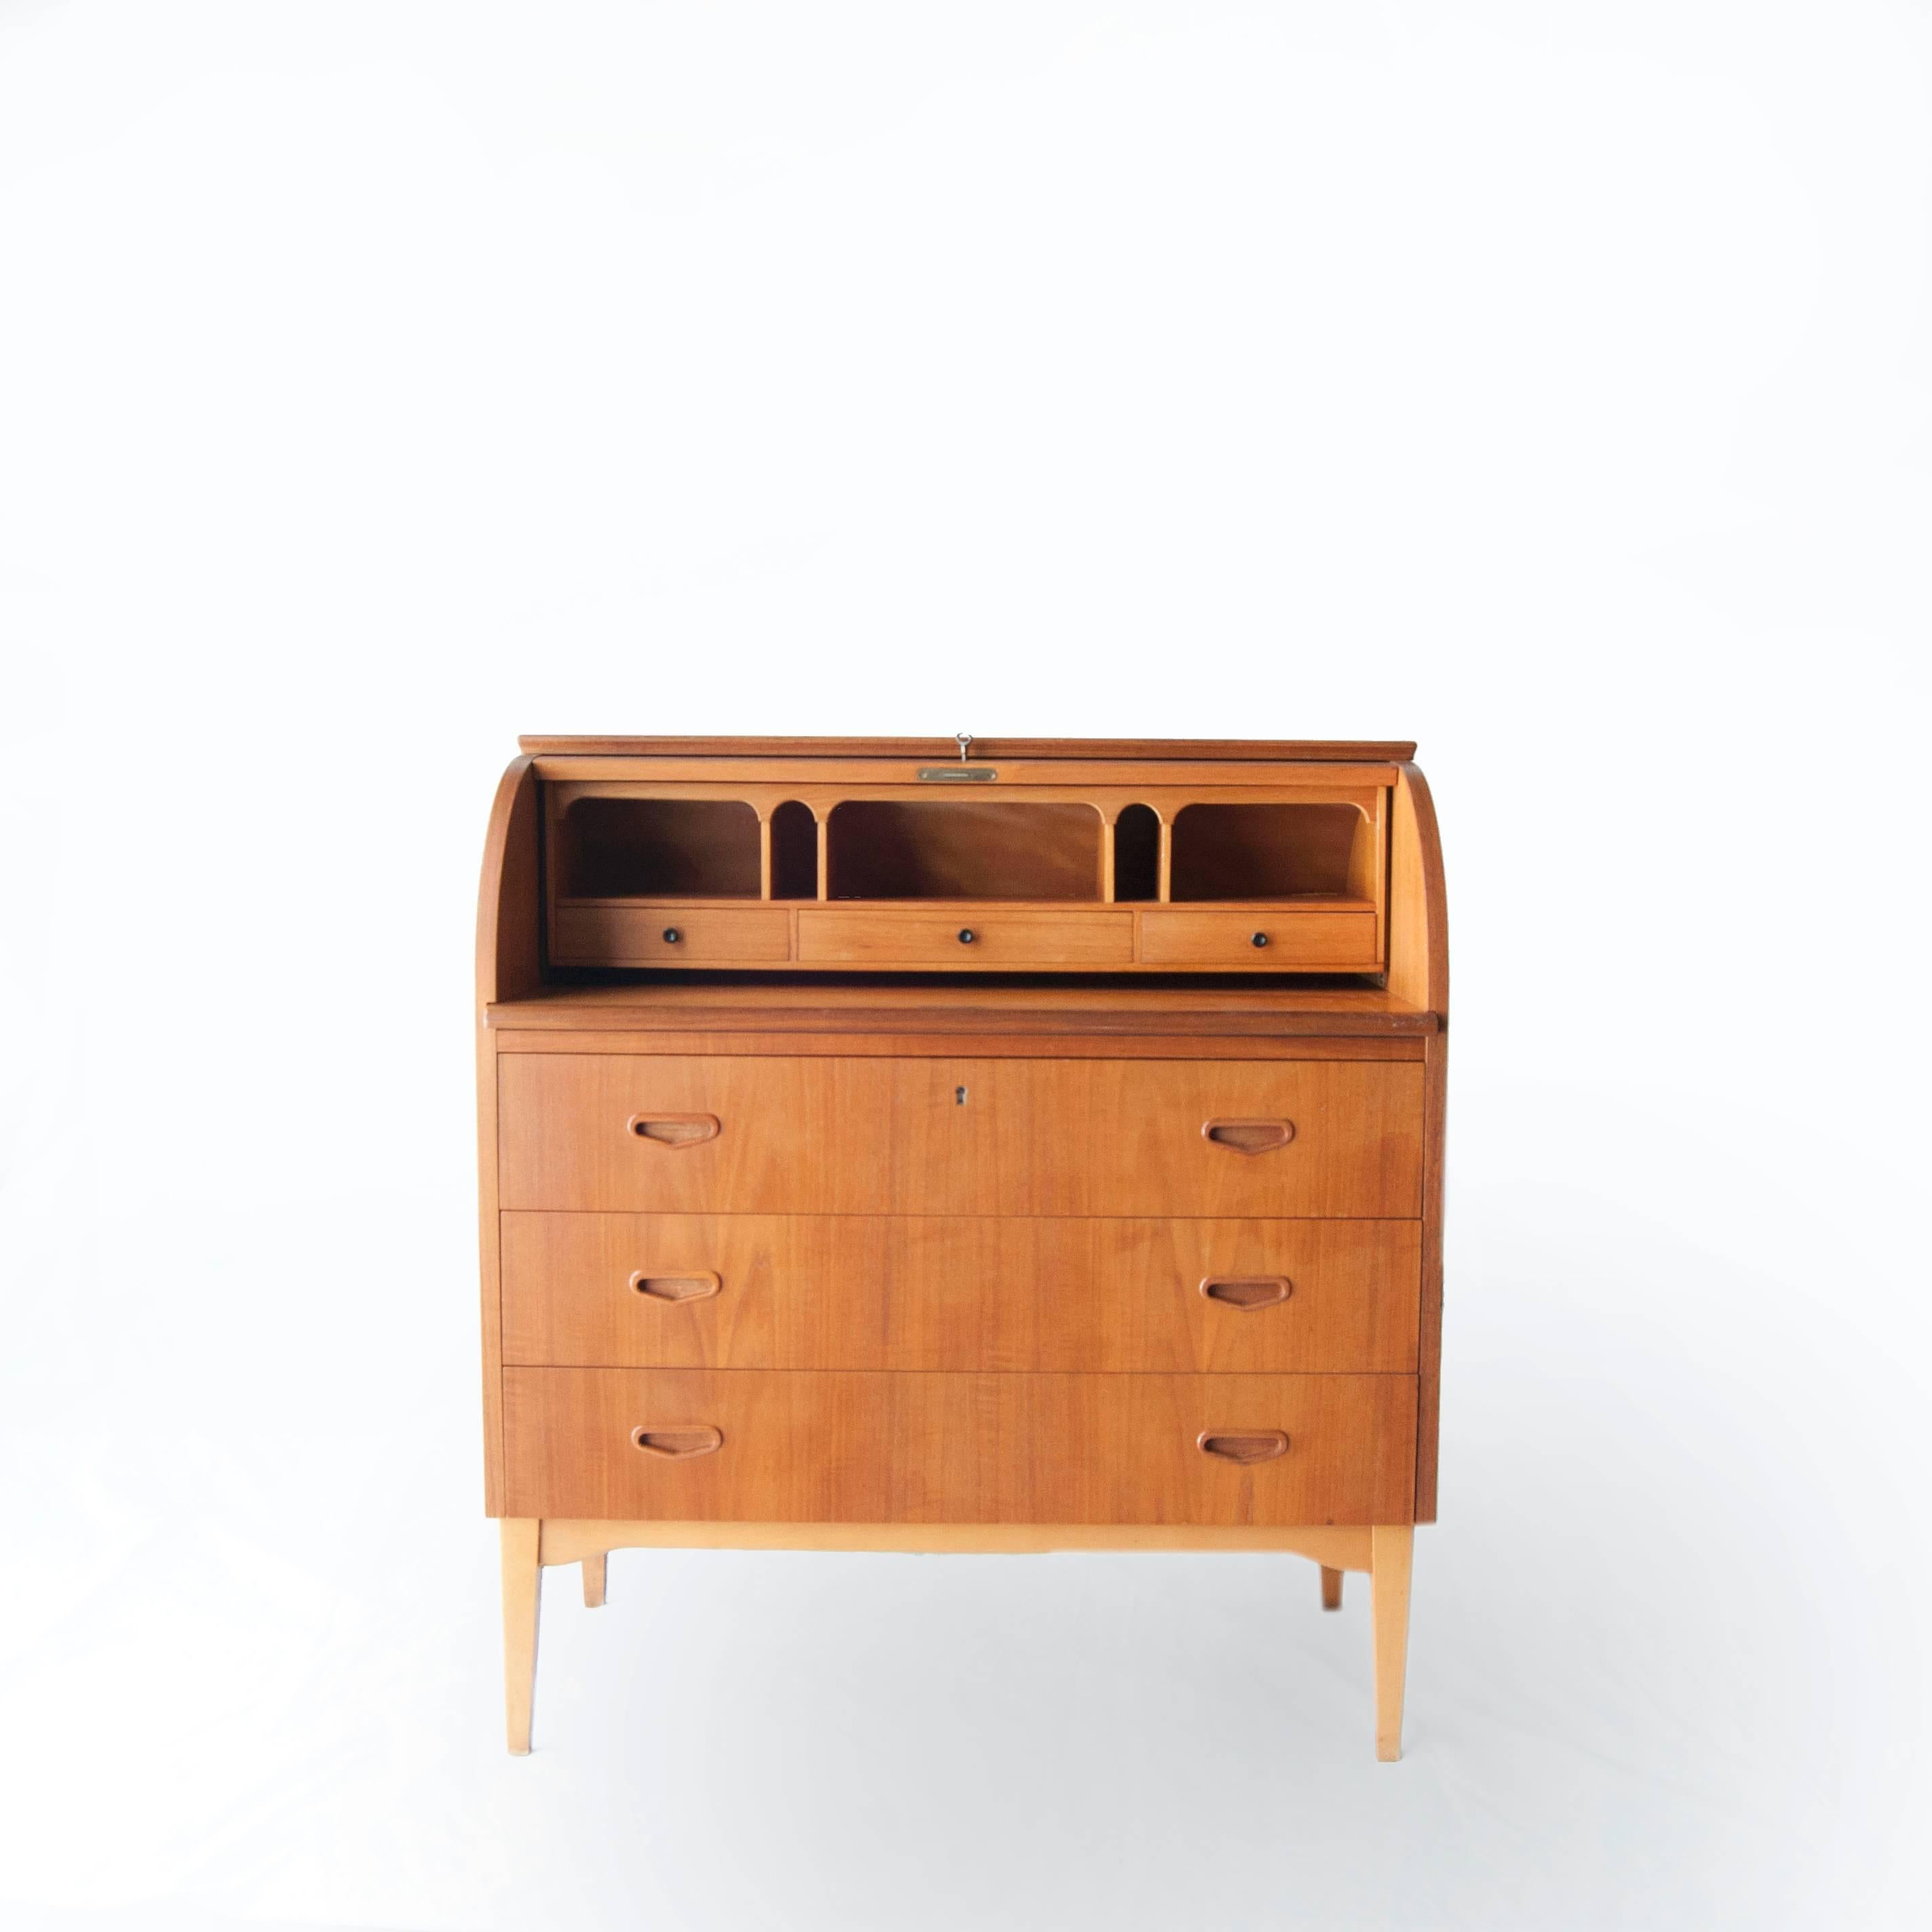 Bureau made in teakwood with three drawers, extensible writing desk and a secreter close by a folding door.